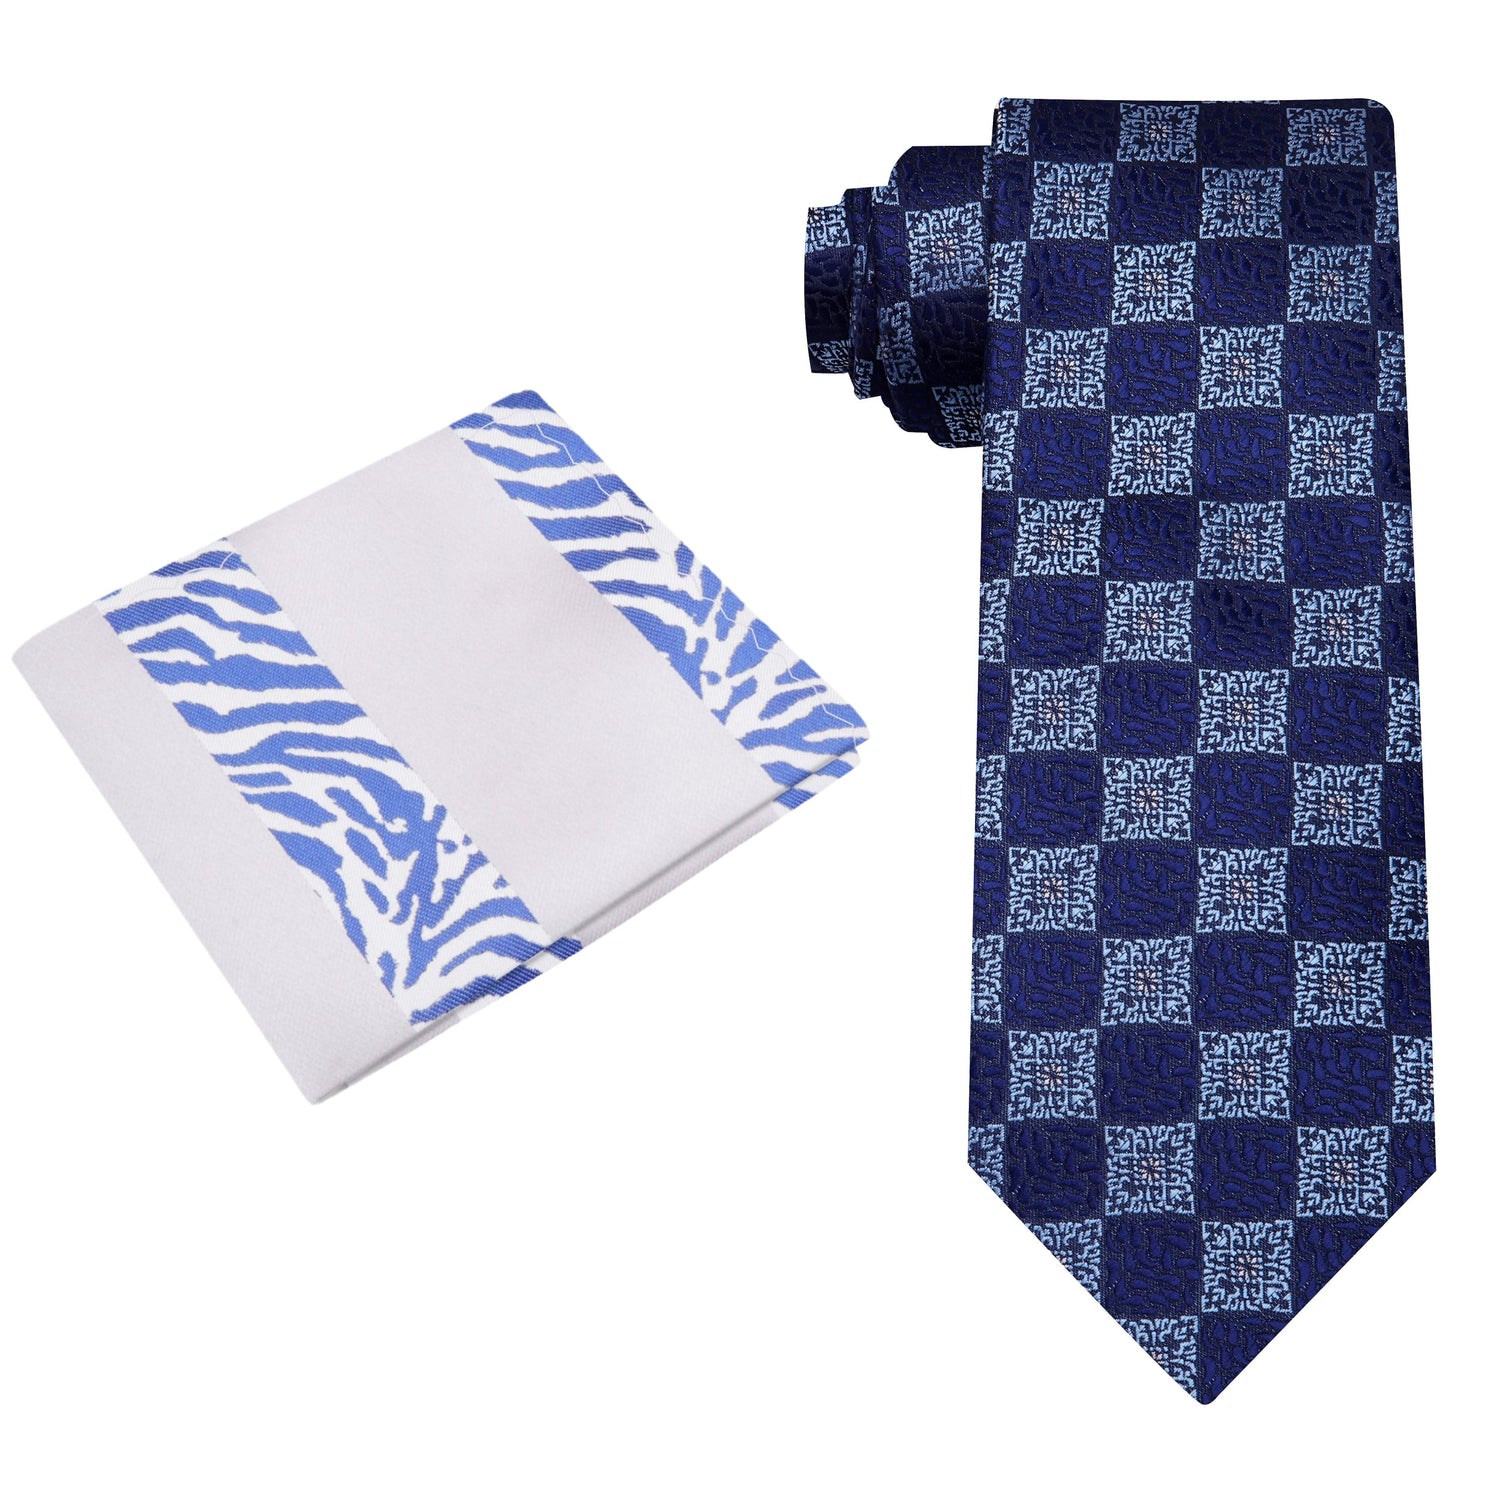 Alt View: Shades of Blue Geometric Necktie and White, Blue Abstract Square